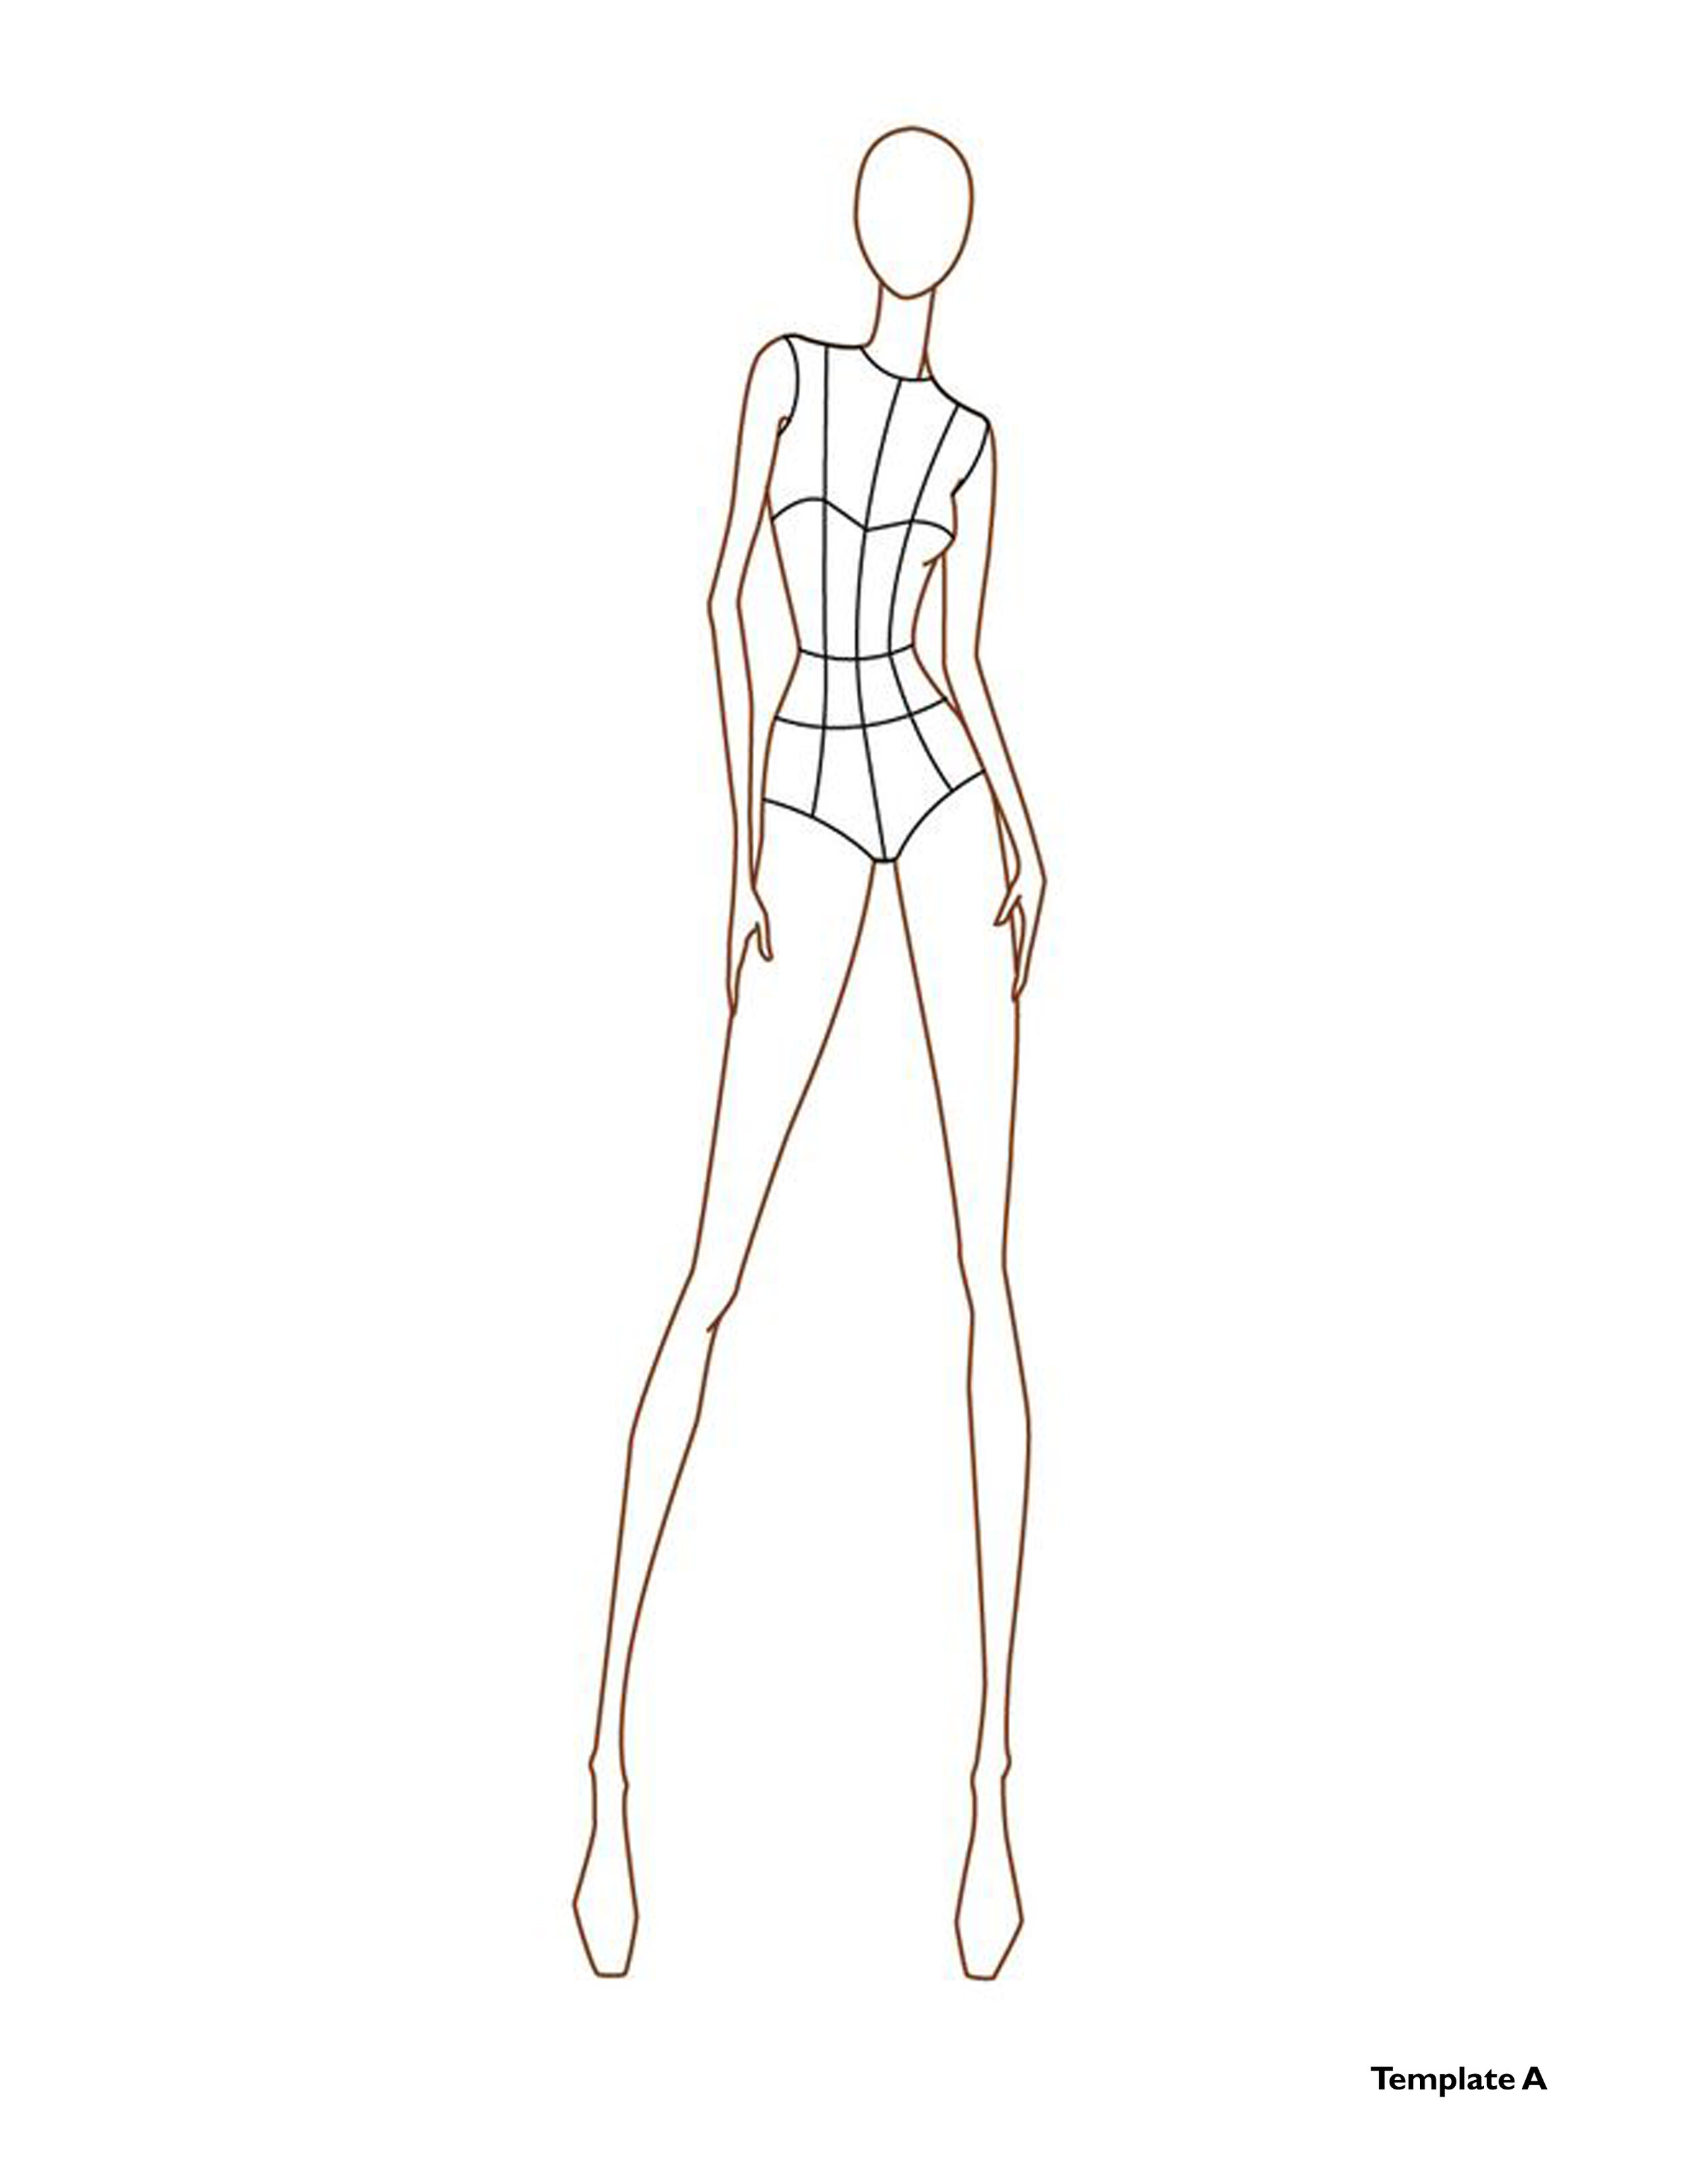 Draw fashion illustration and sketches by Scribbledesign1 | Fiverr